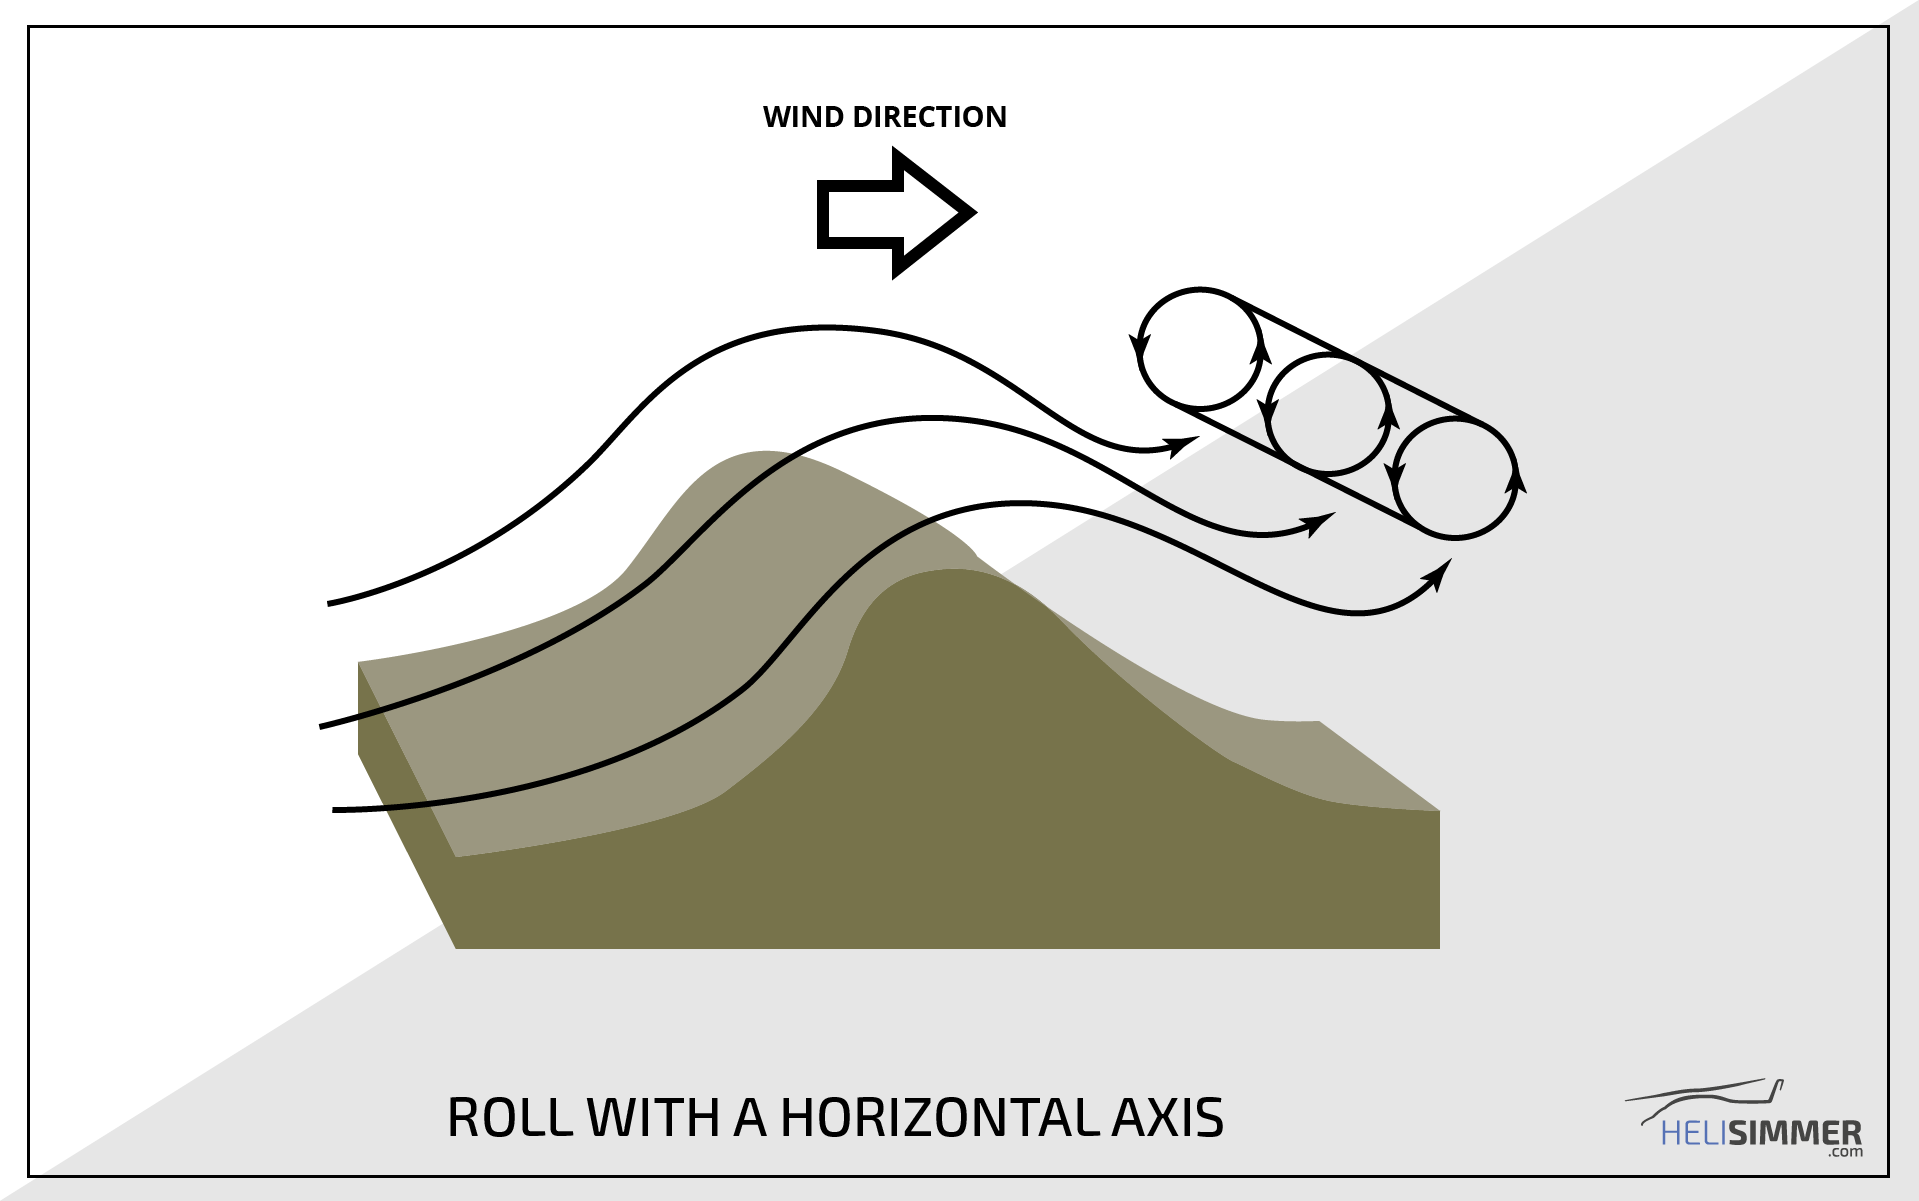 Roll with a horizontal axis